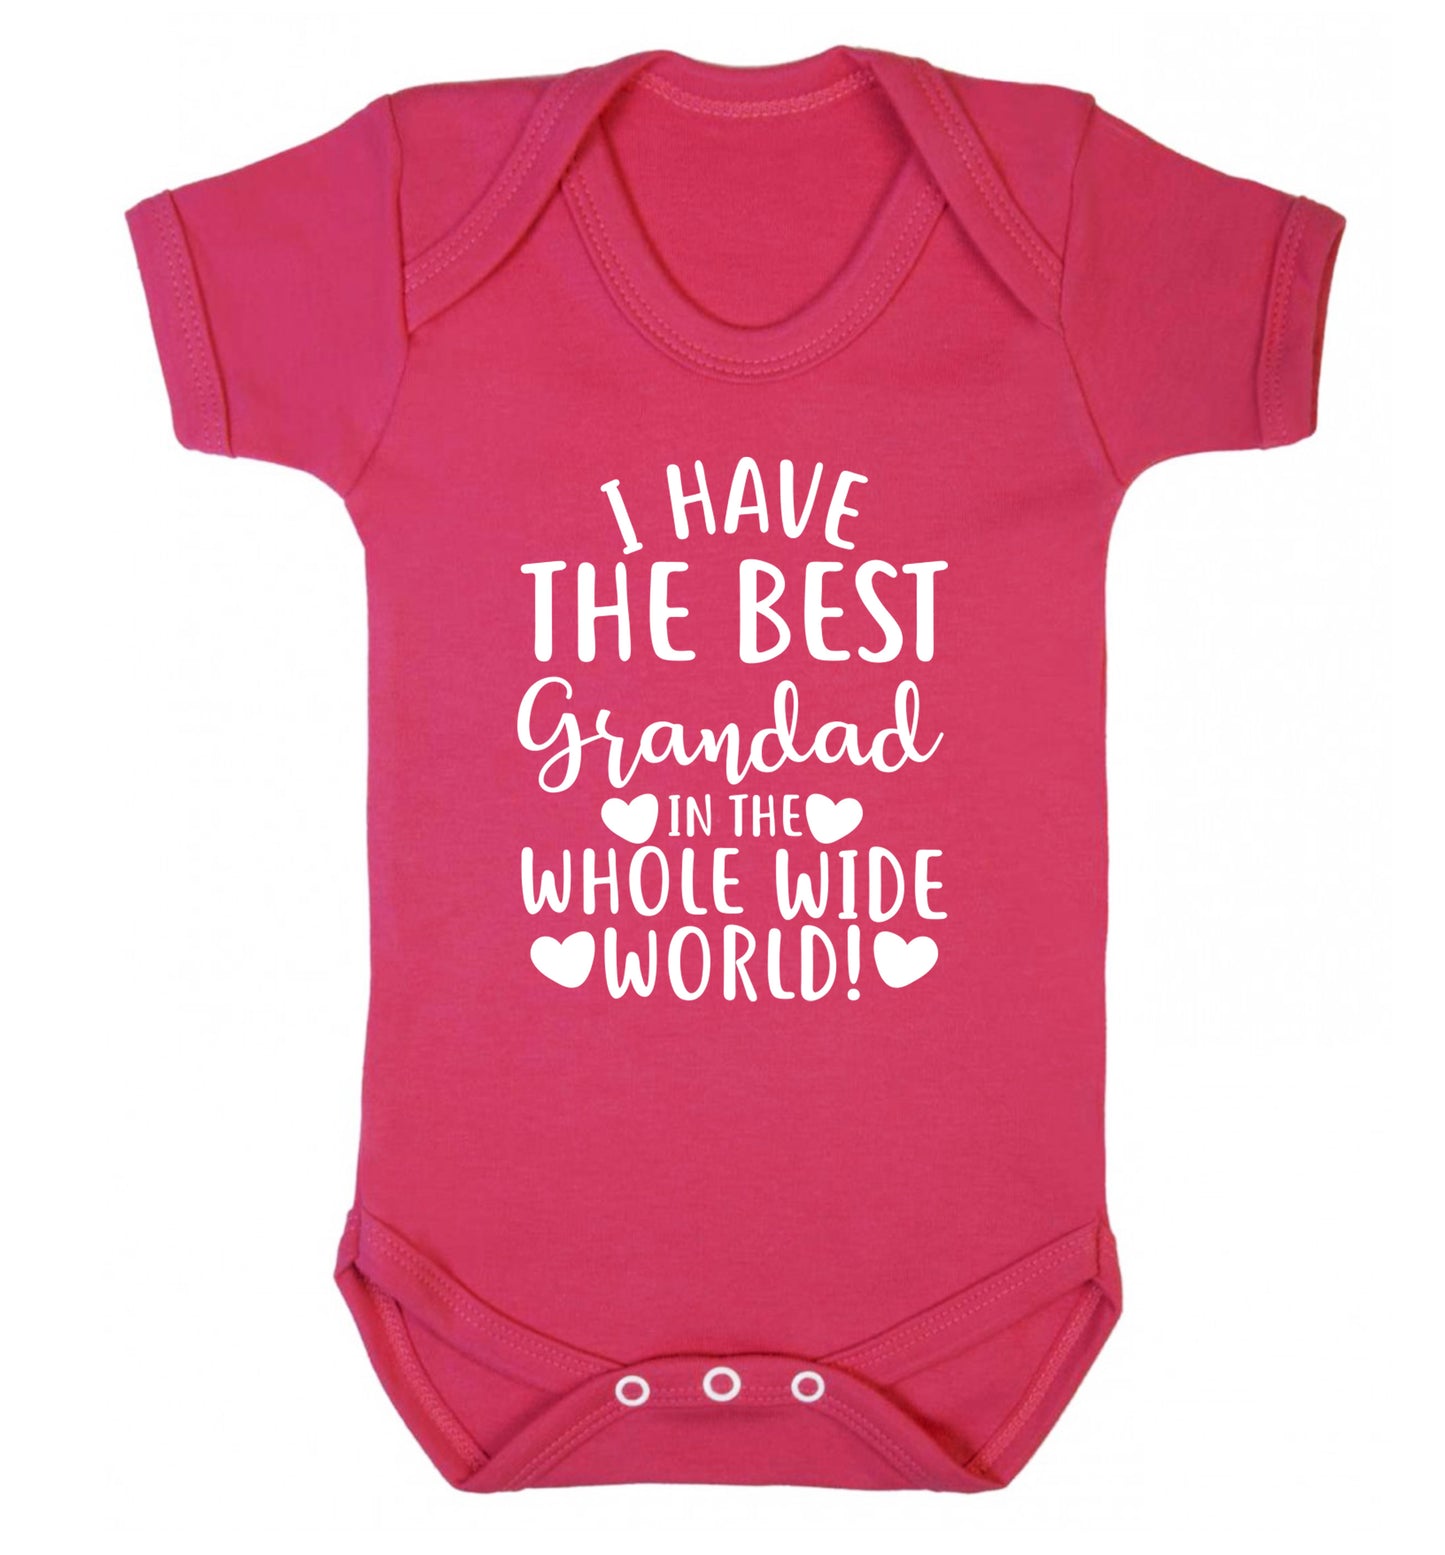 I have the best grandad in the whole wide world! Baby Vest dark pink 18-24 months